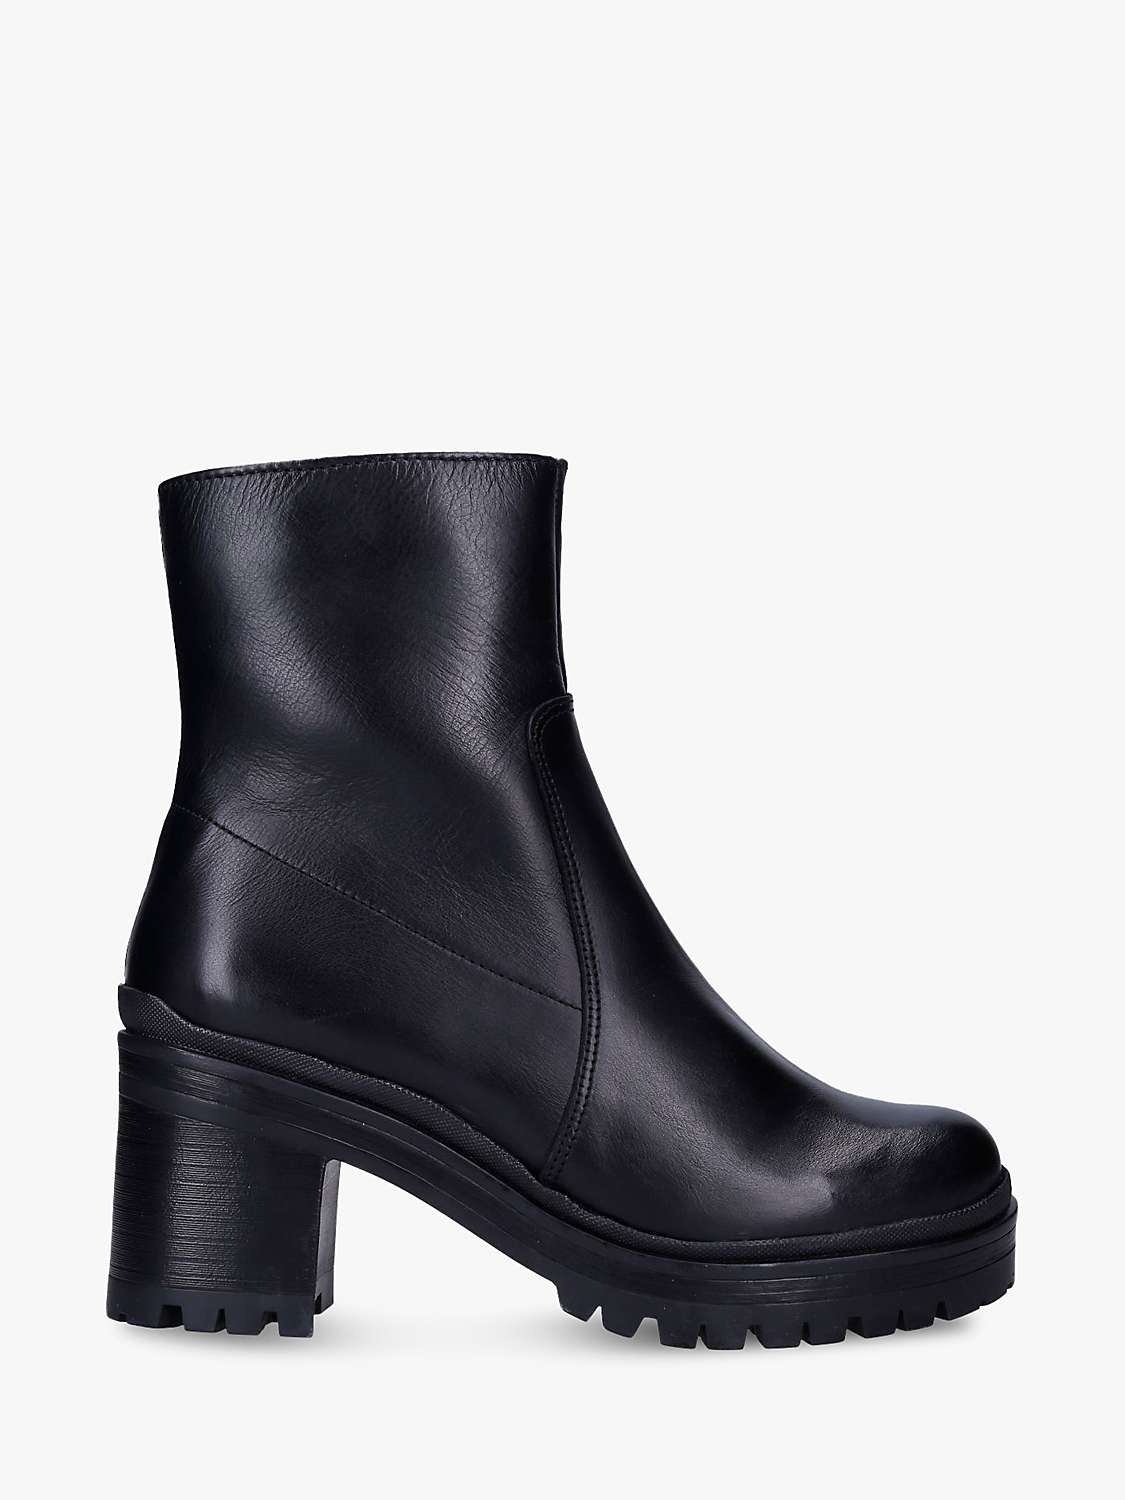 Carvela Comfort Secure Leather Ankle Boots at John Lewis & Partners